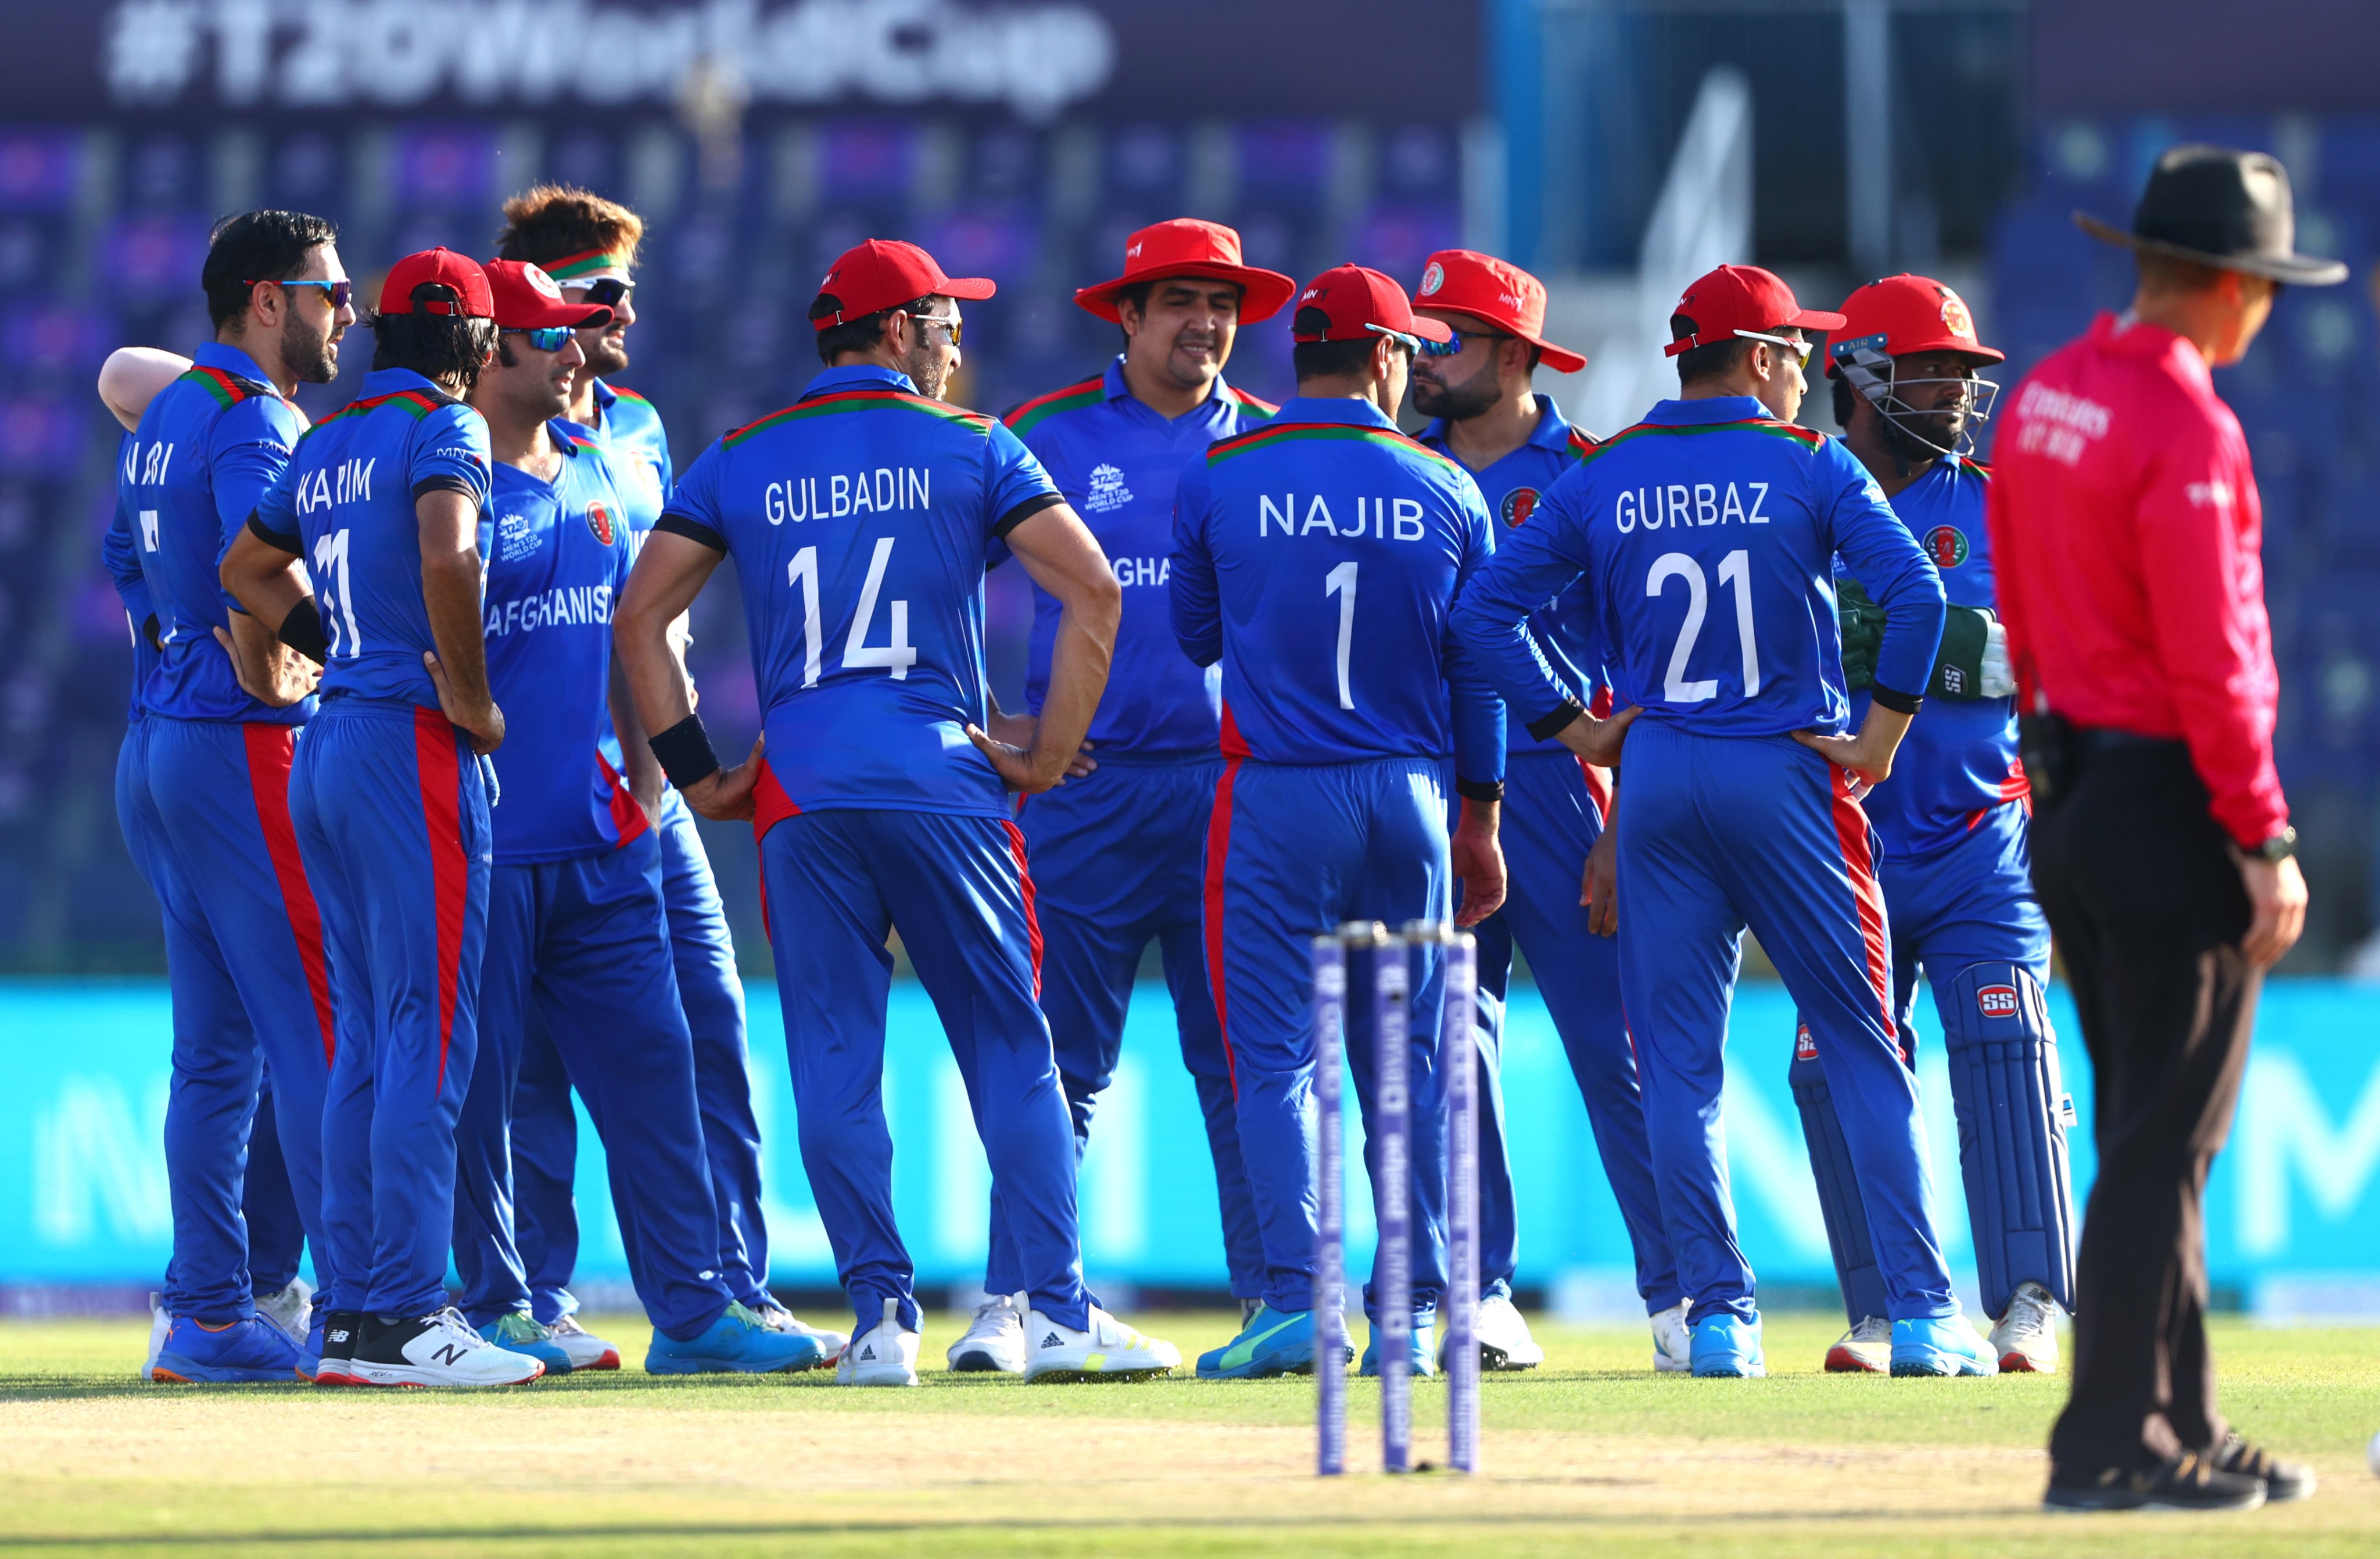 T20 World Cup 2021 | Afghanistan can beat India by batting well in Abu Dhabi, says Hamid Hassan